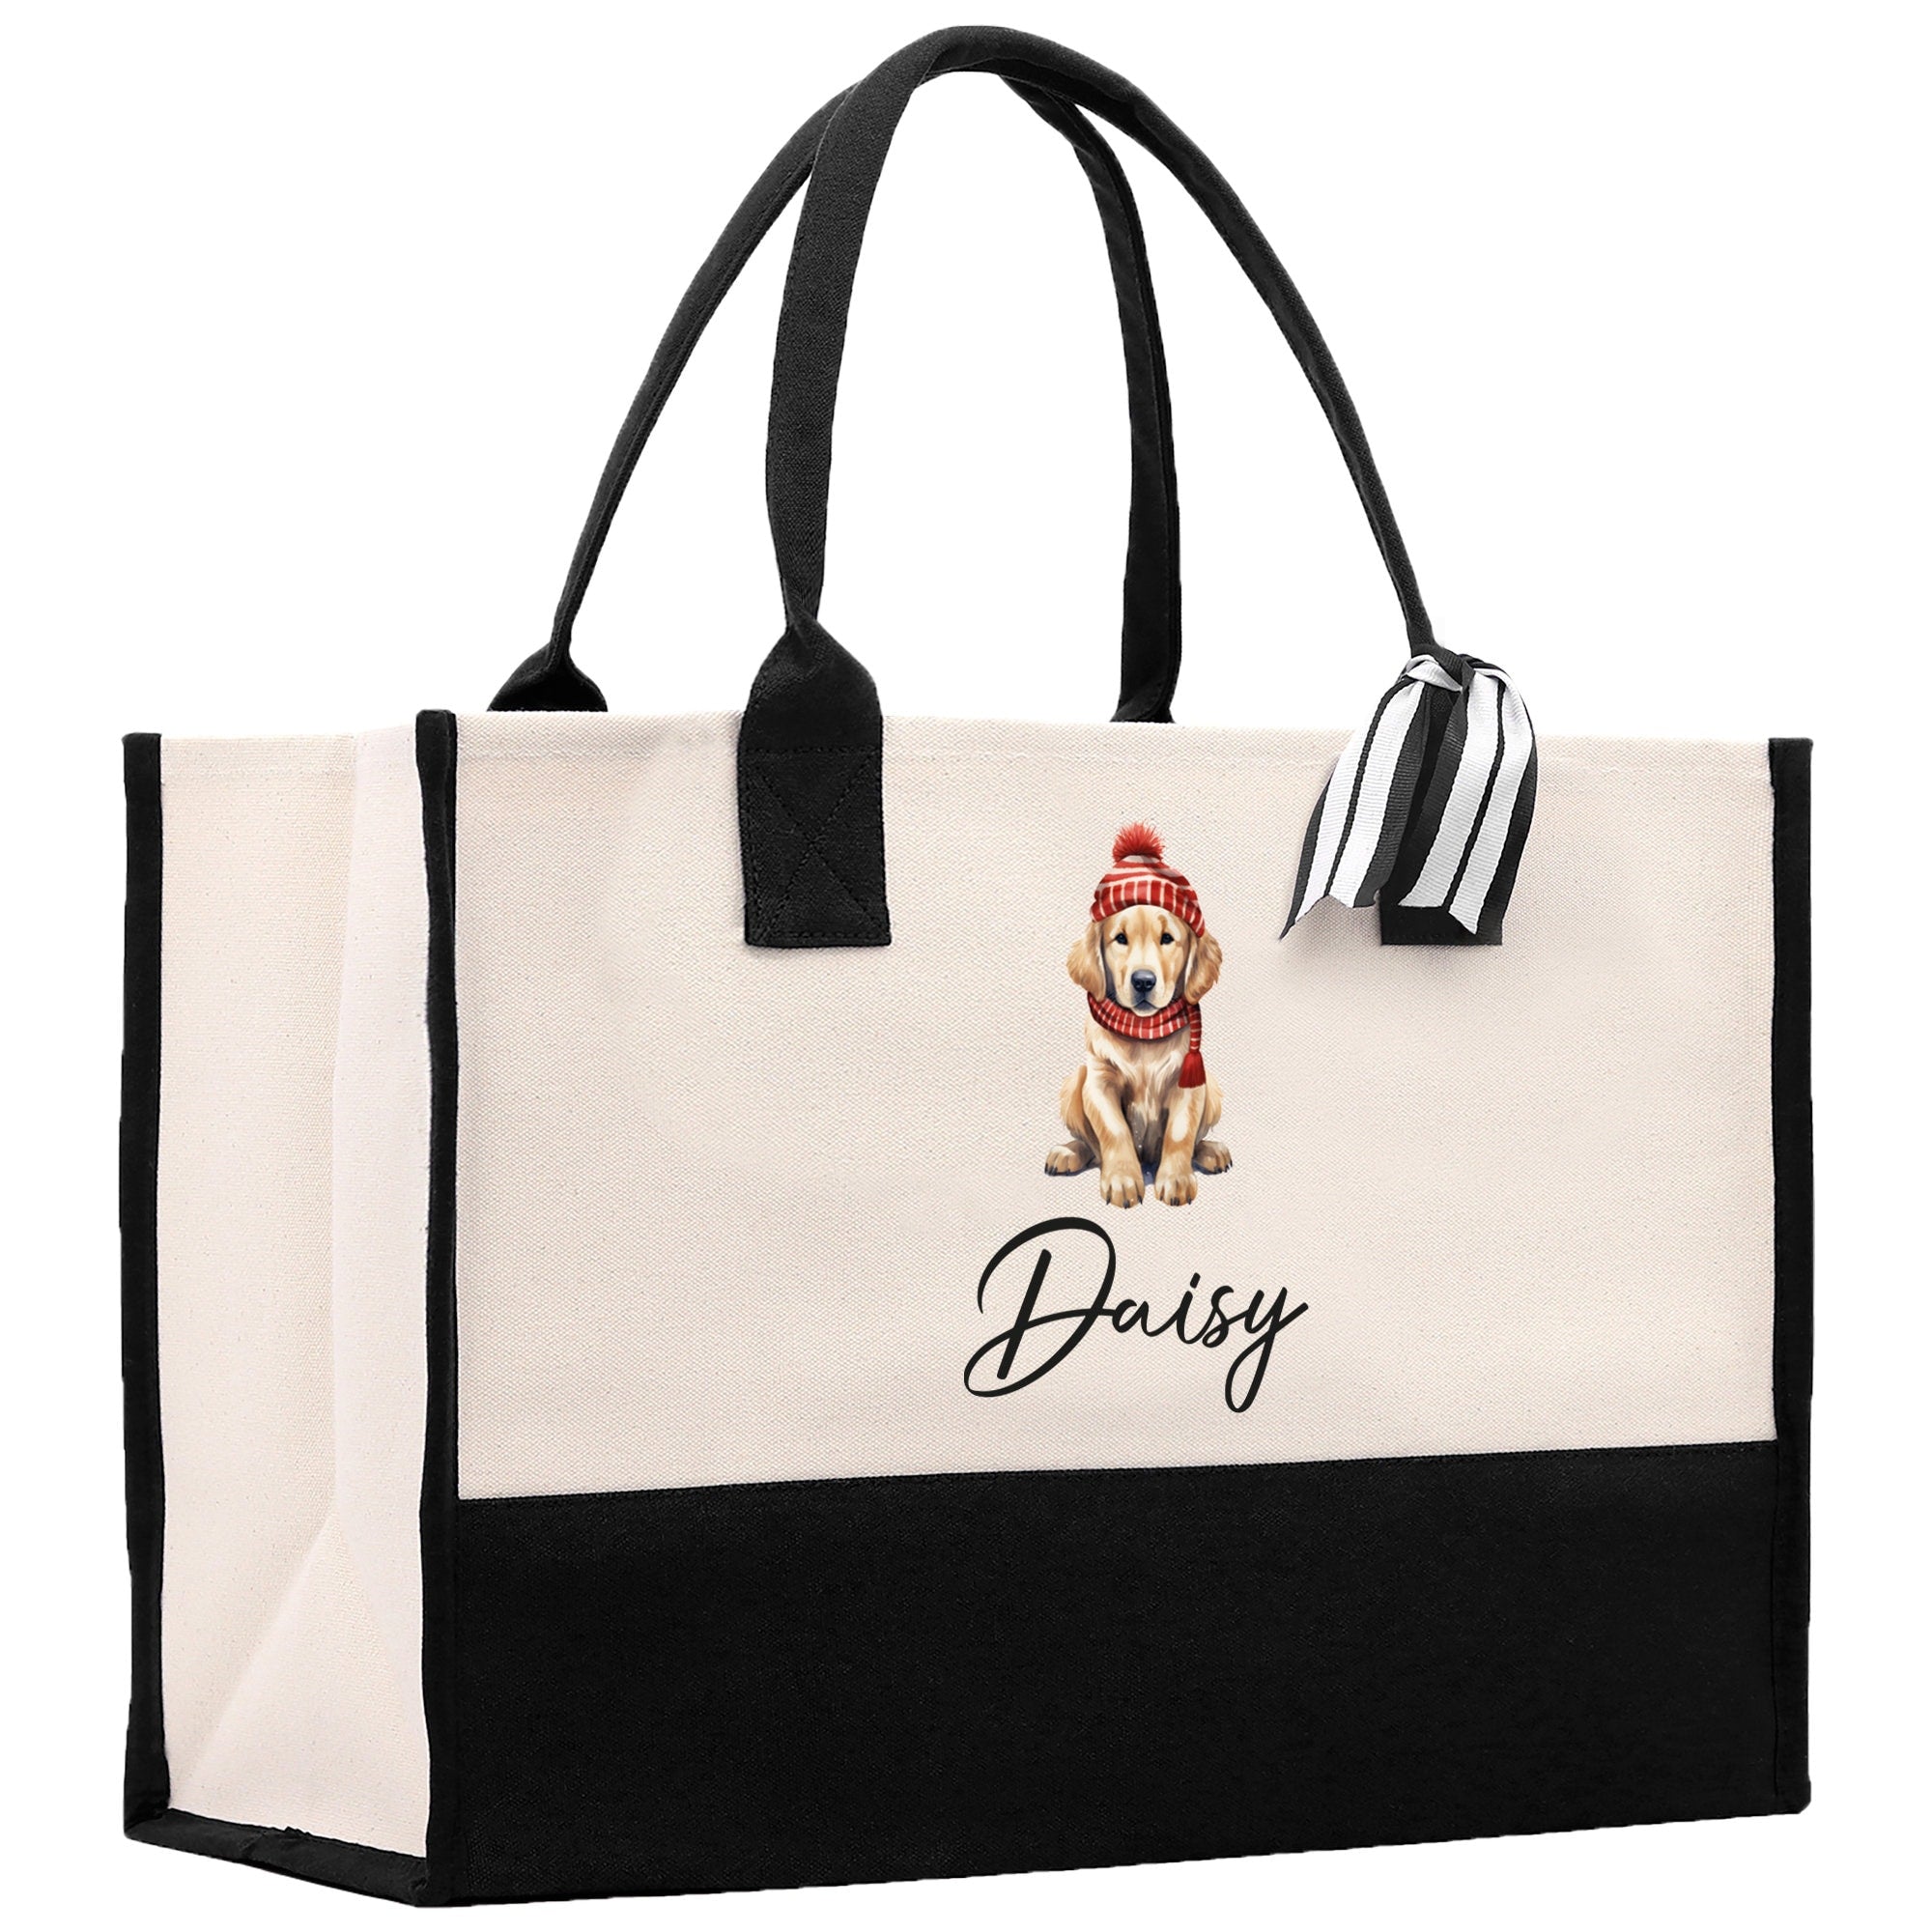 a black and white bag with a dog on it